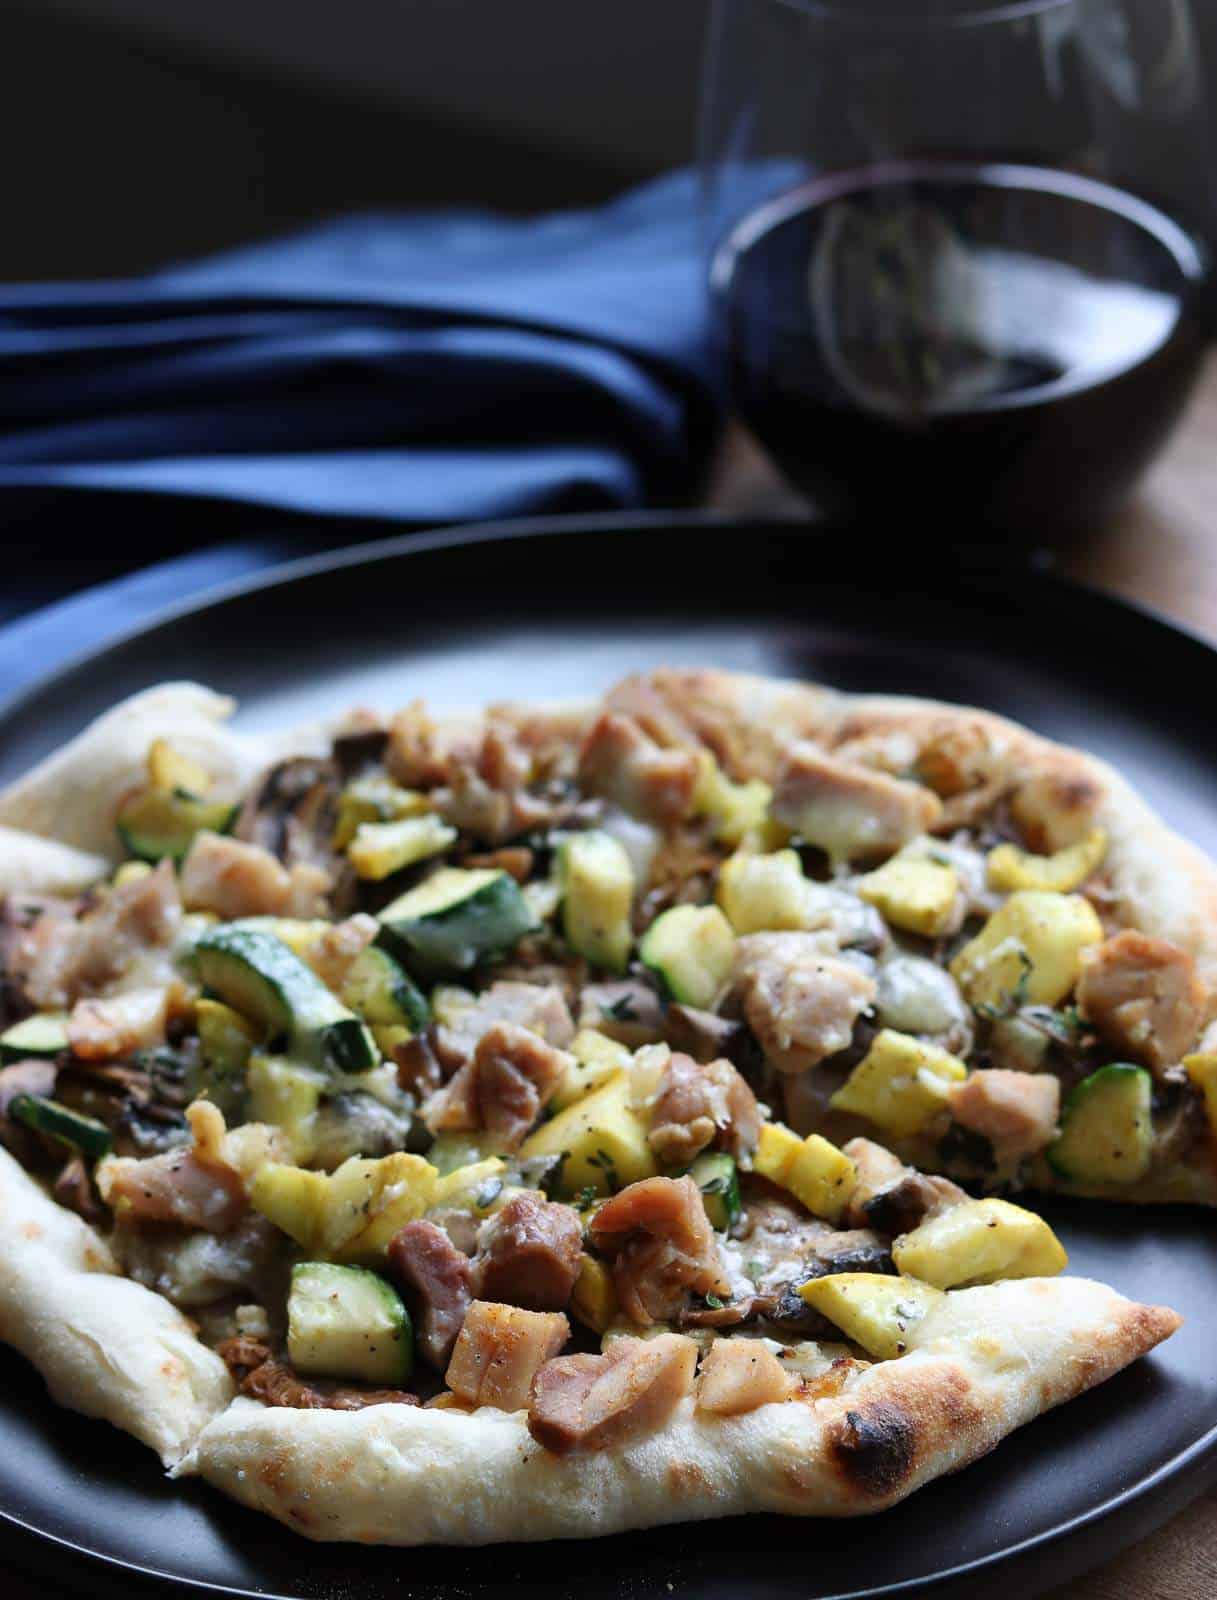 Wild Mushroom Pizza with Chicken, Zucchini and Truffle Oil on a black plate